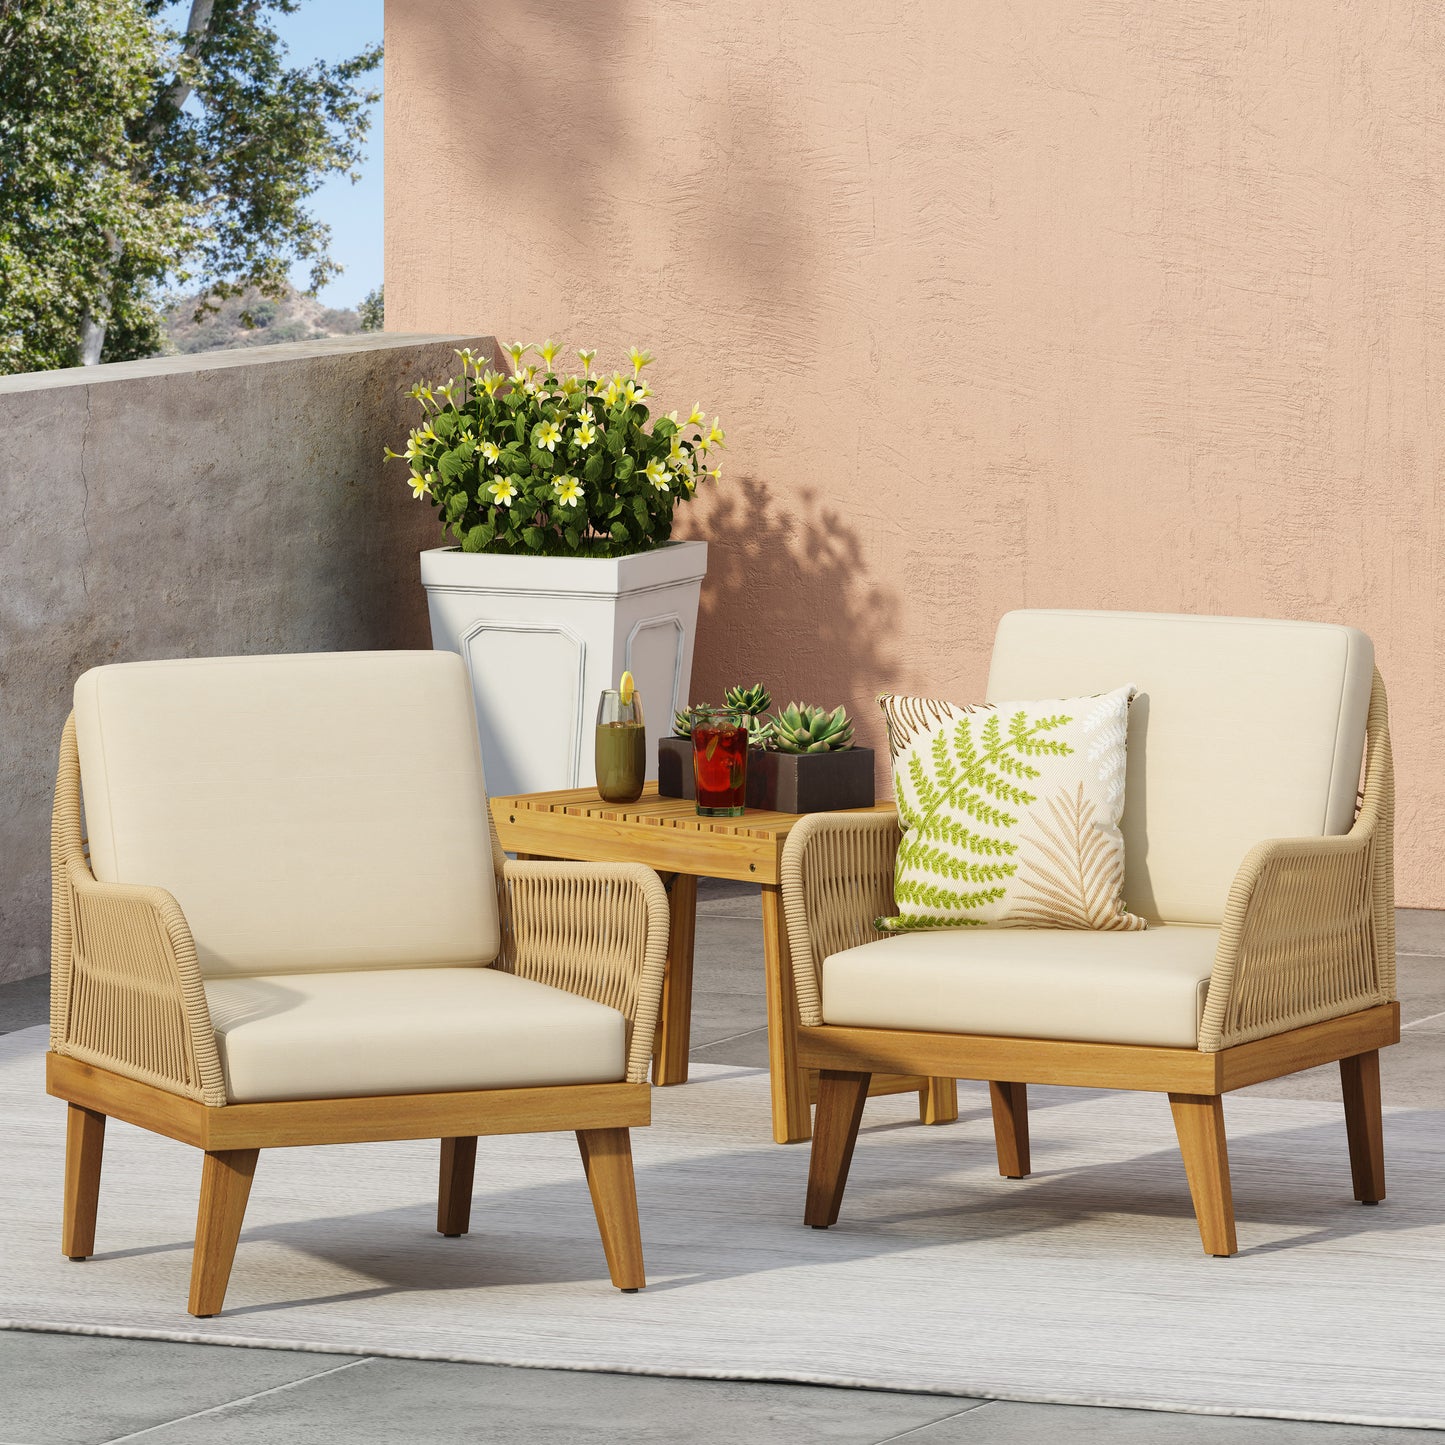 Hueber Outdoor Acacia Wood Club Chairs with Cushion, Set of 2, Teak, Light Brown, and Beige